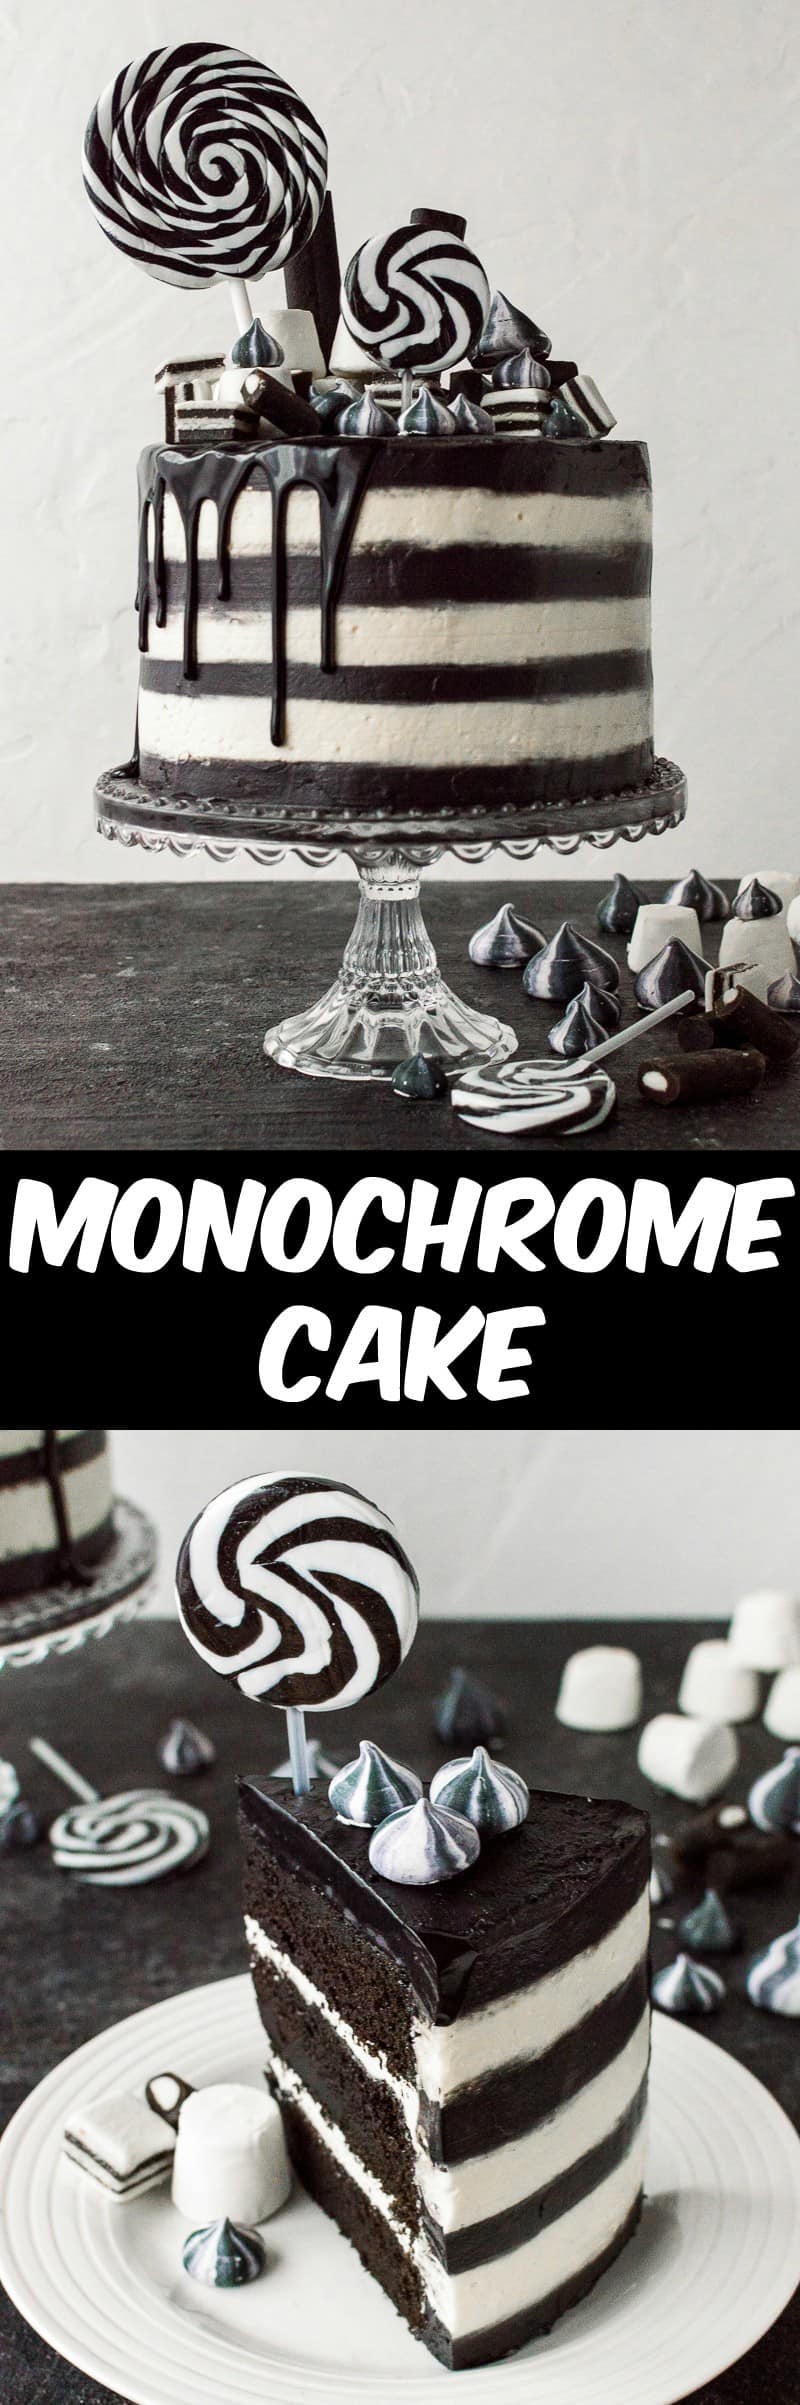 Monochrome cake (aka Beetlejuice cake) - a stylish black and white stripy chocolate and vanilla cake. Perfect for a classy Halloween party.